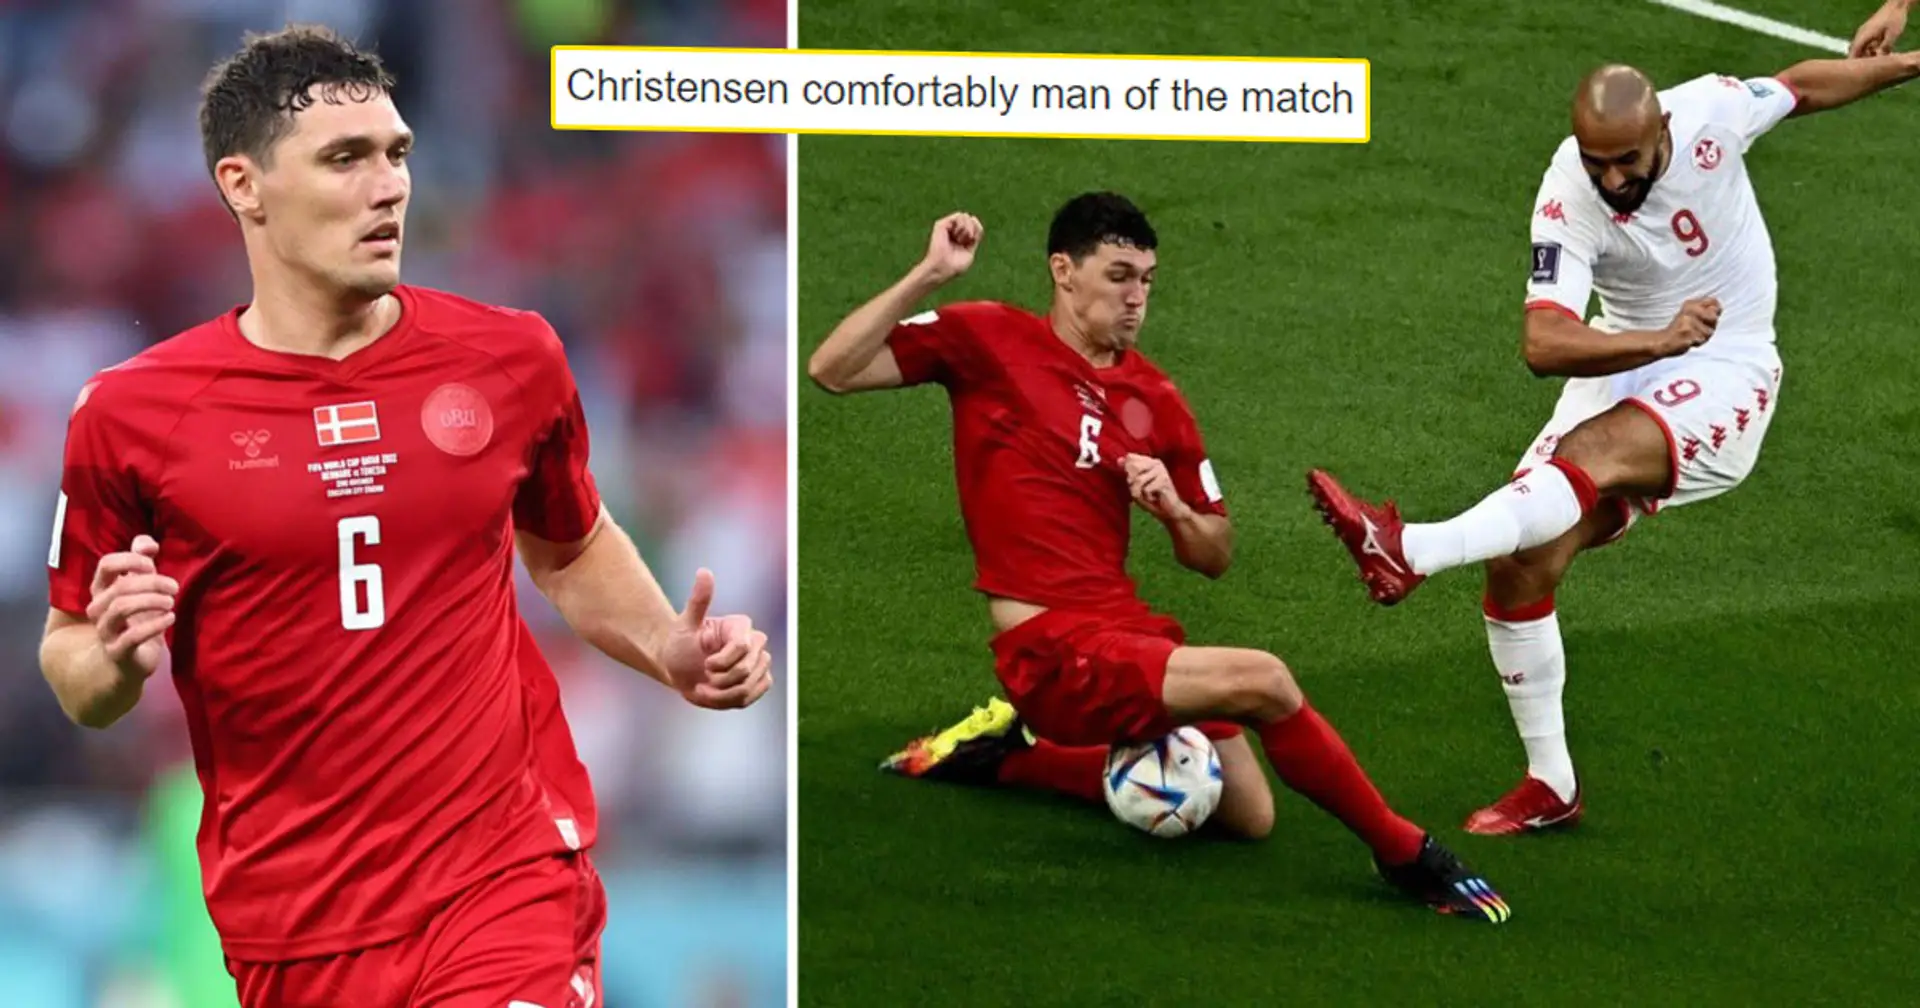 'We got him for absolutely free': fans react to Christensen solid match at World Cup